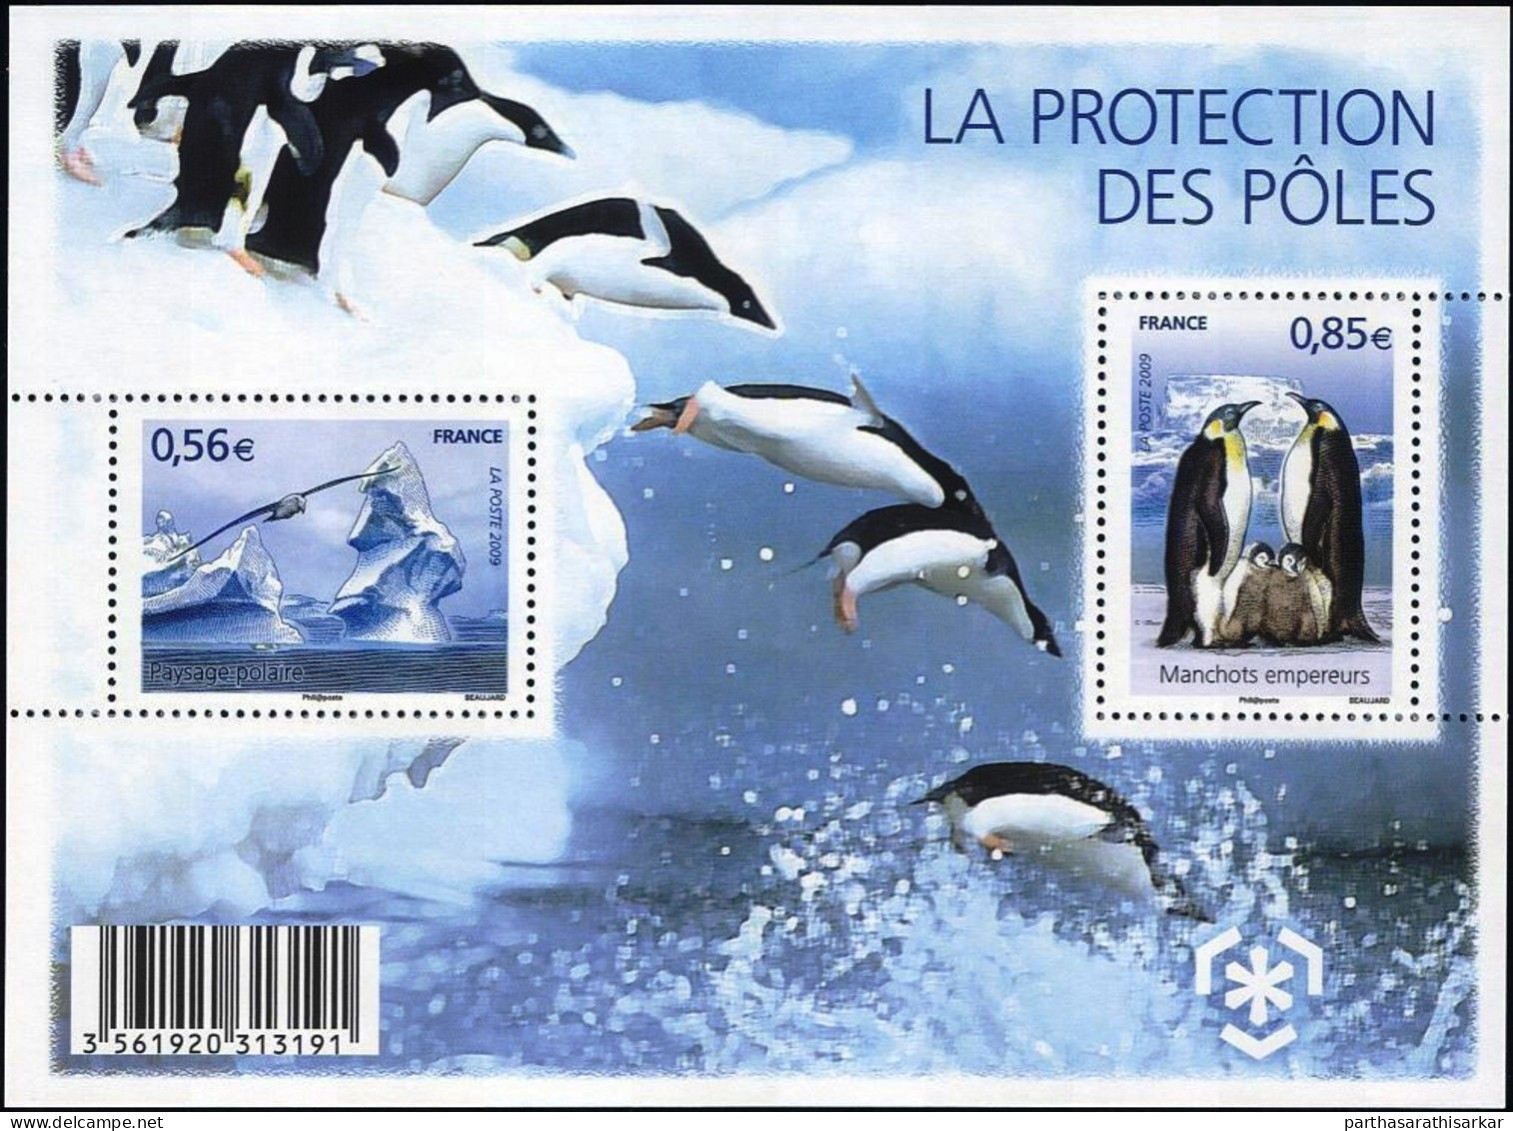 FRANCE 2009 PROTECTION OF THE POLAR REGIONS MINIATURE SHEET MS MNH - Anno Polare Internazionale